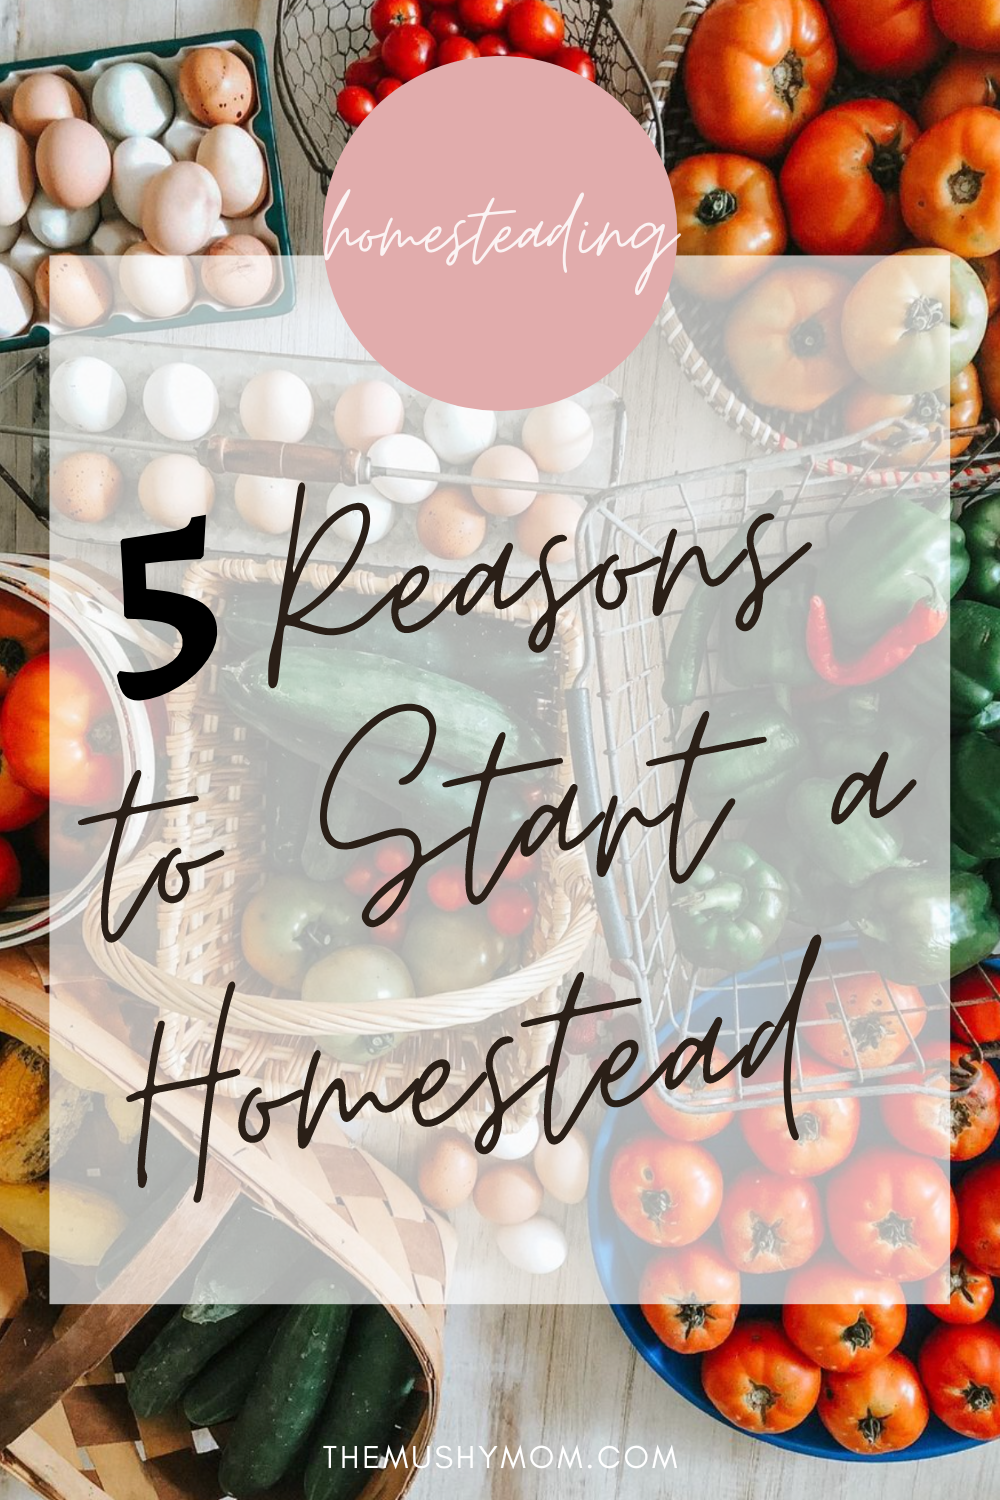 5 Reasons to start a homestead.png